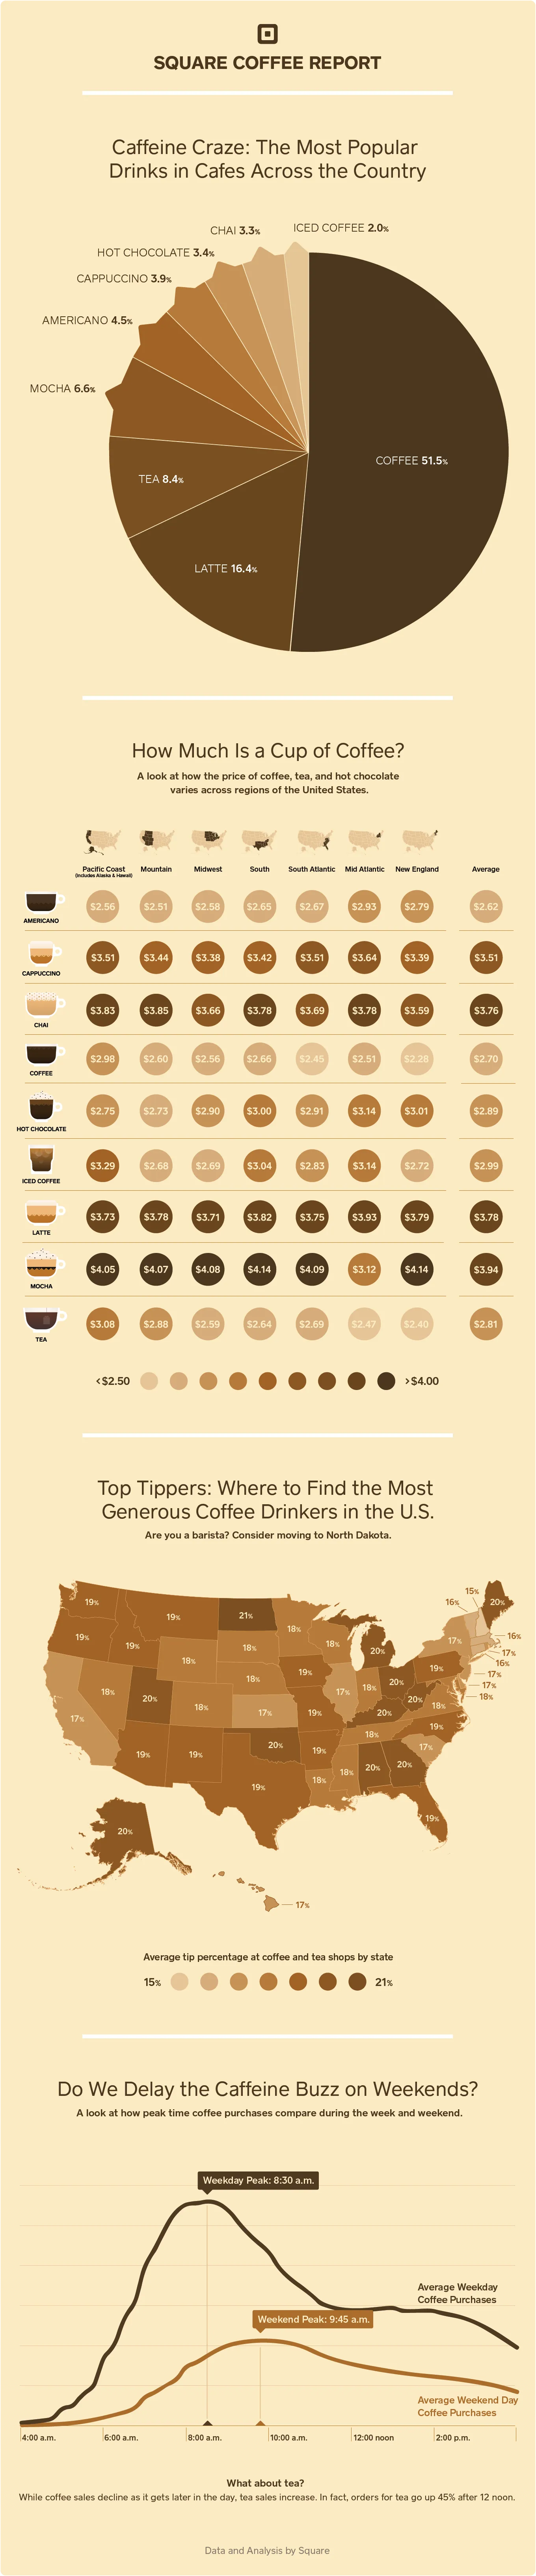 Coffee data, state by state.